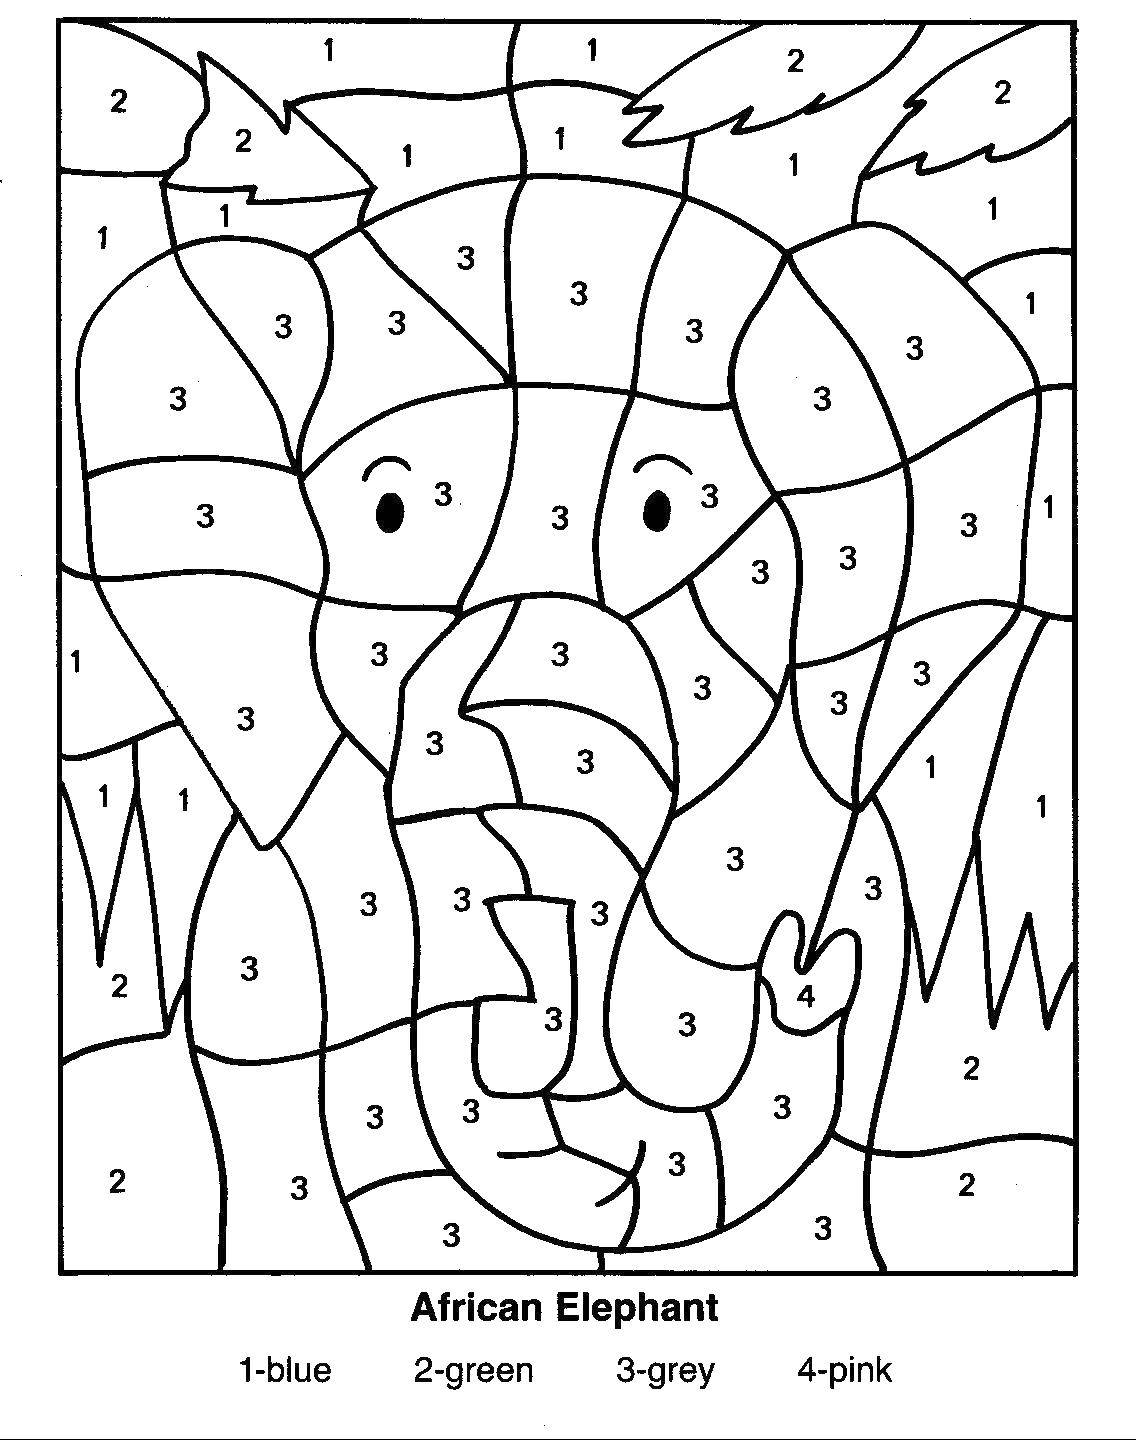 Coloring Color by numbers elephant. Category That number. Tags:  color by numbers, numbers, elephants.